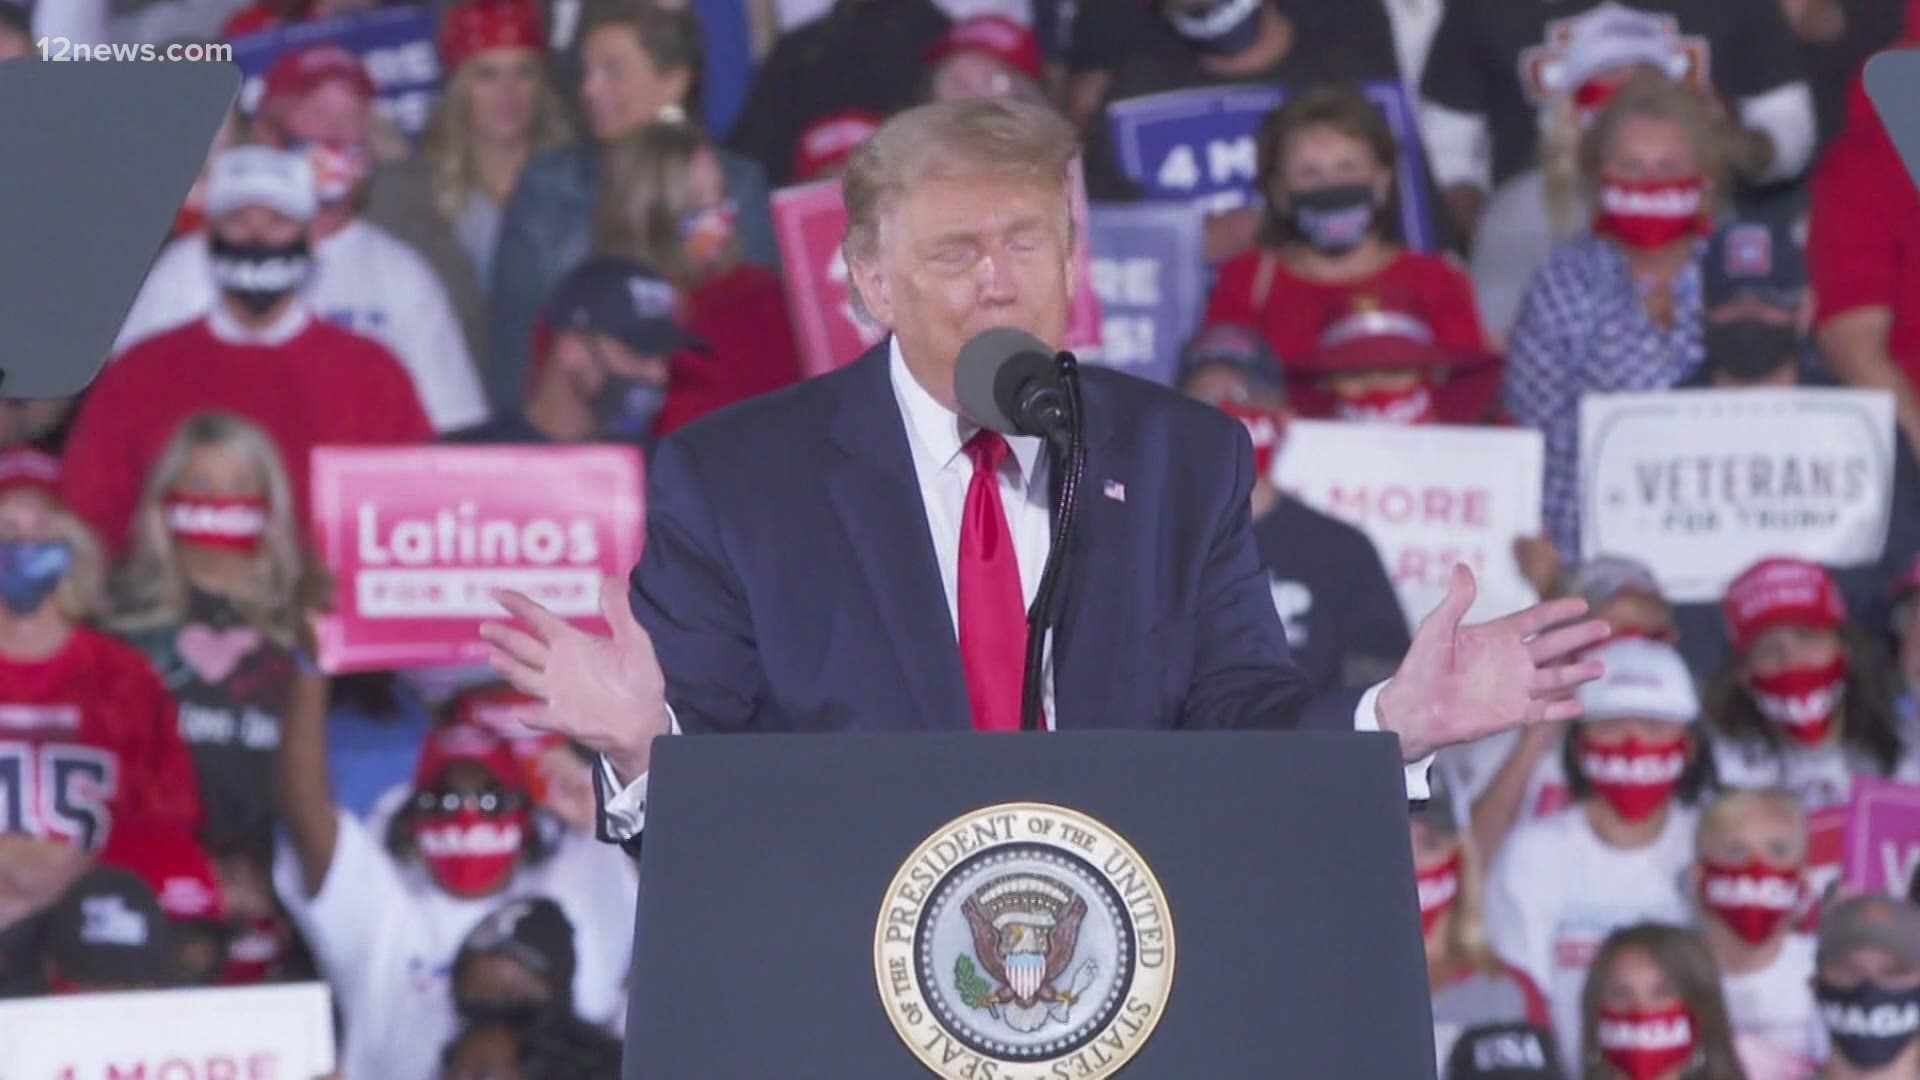 President Trump is making a return visit to Arizona on Monday with stops in Prescott and Tucson. Rachel Cole has more.